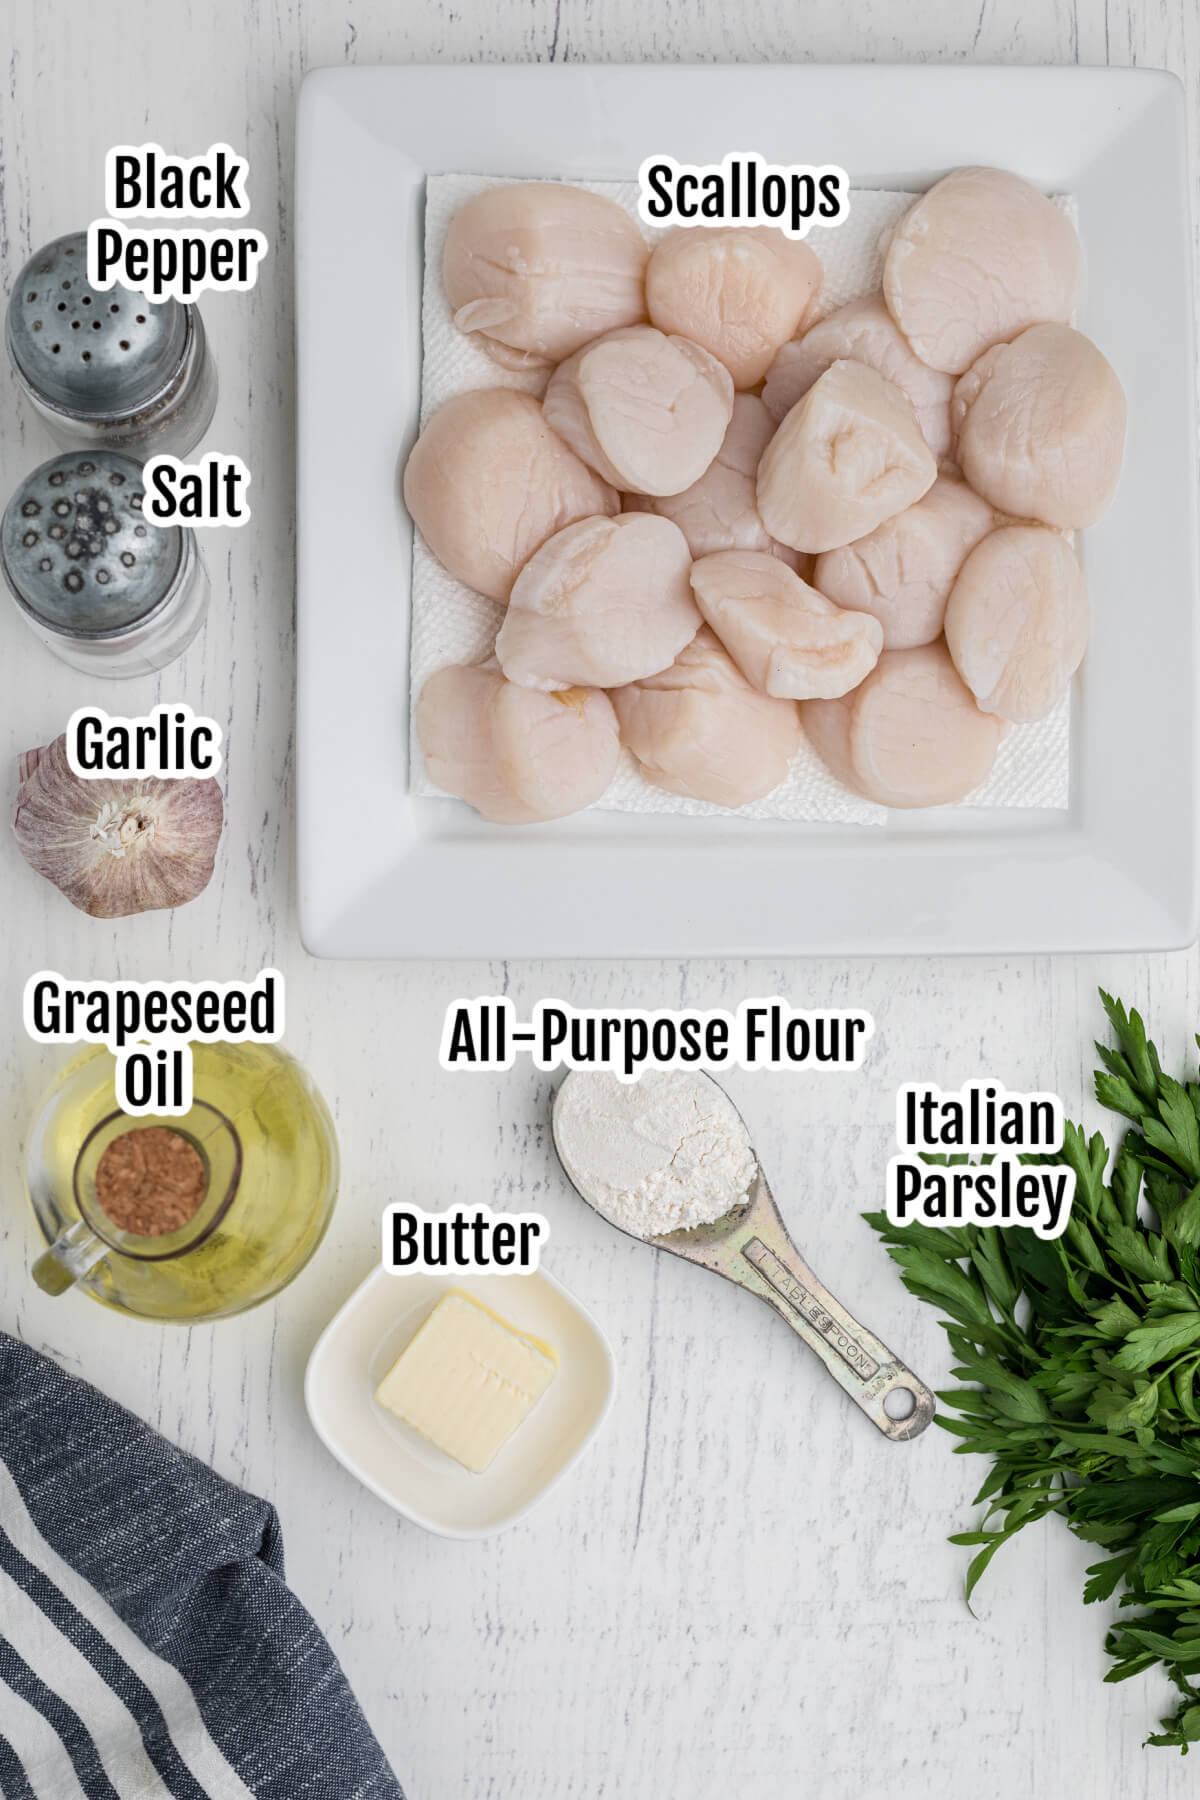 Image of the ingredients needed for making seared scallop recipe.